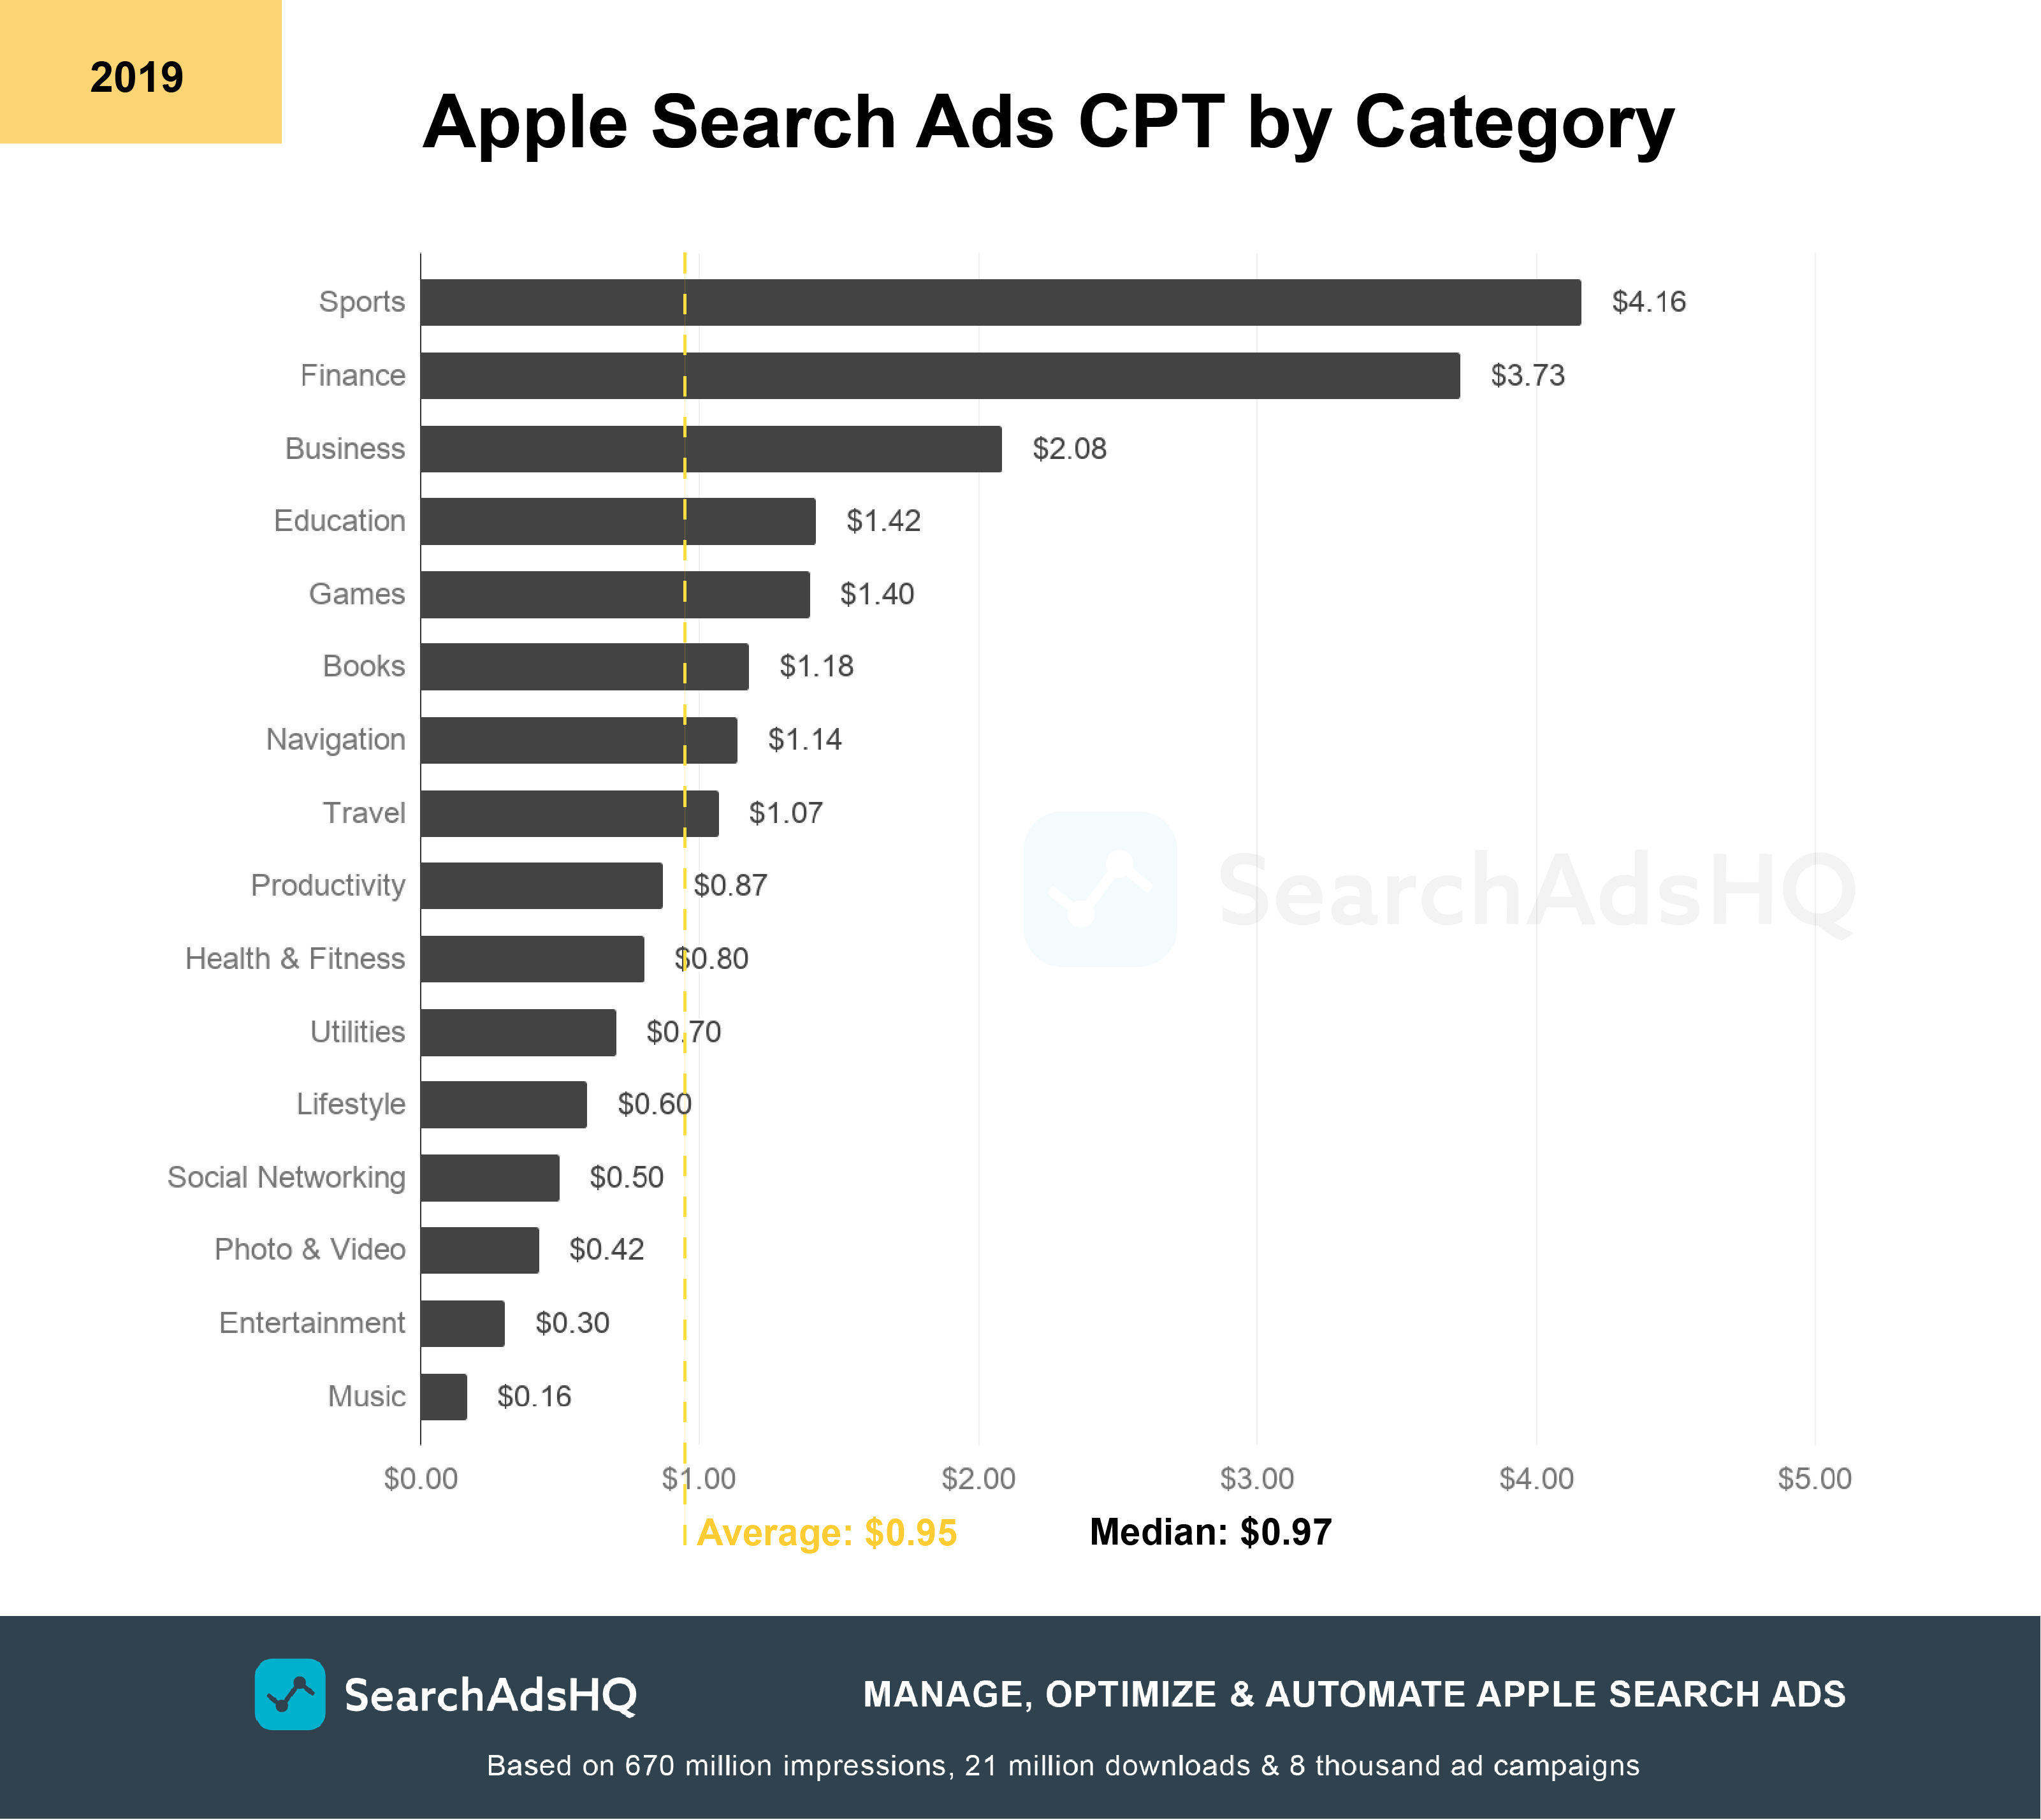 Apple Search Ads benchmarks: CPT 2019